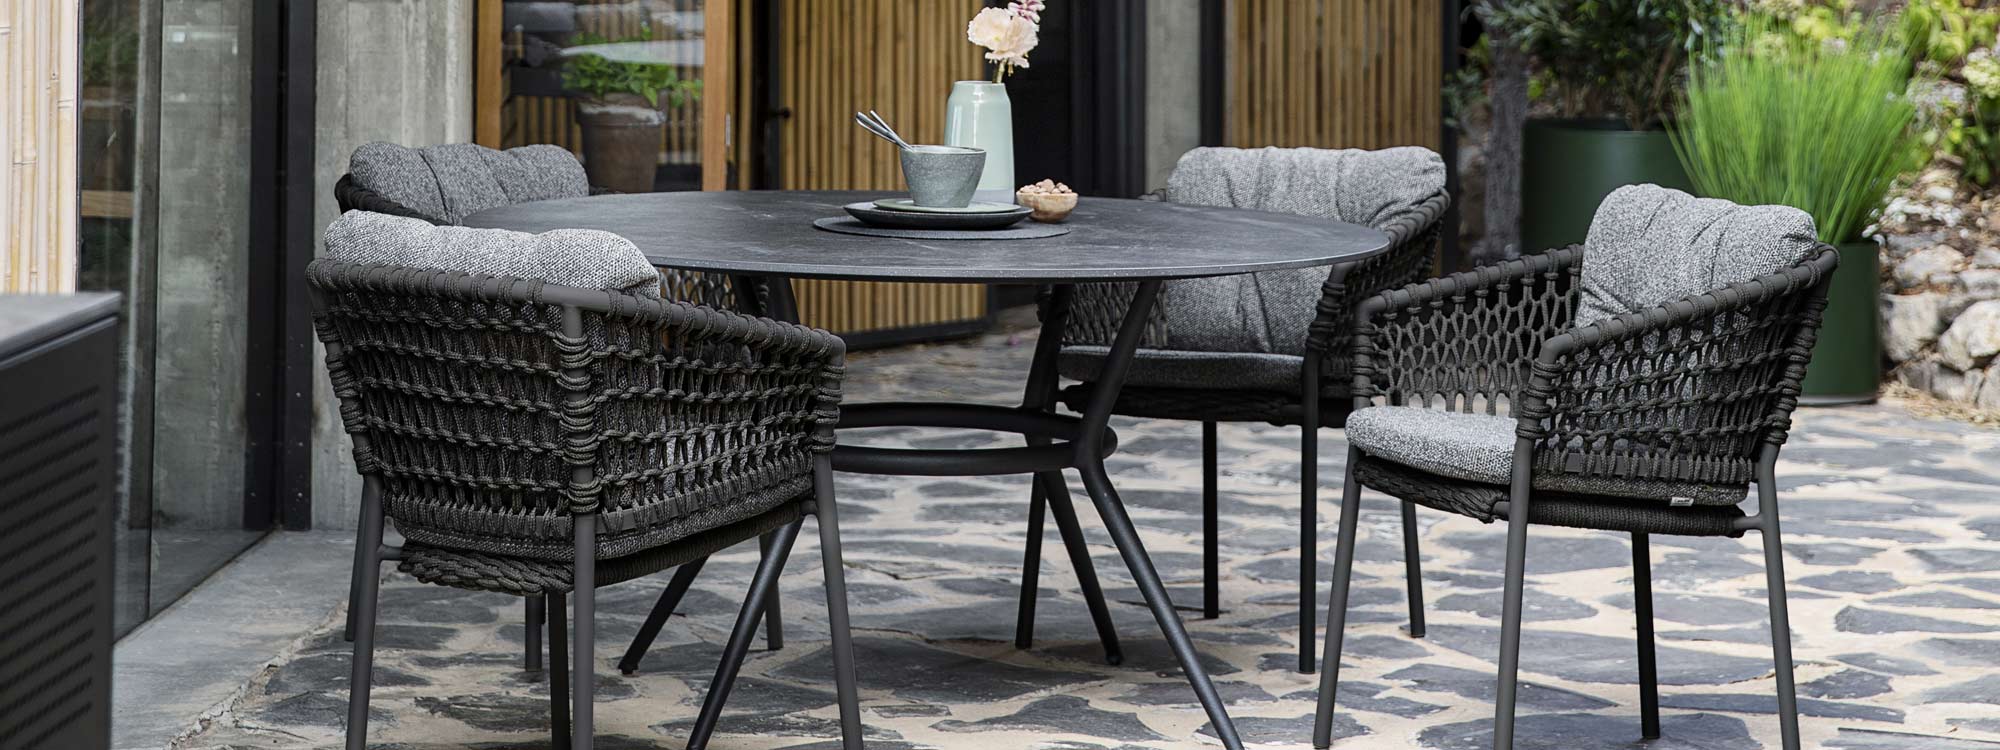 Image of dark grey Ocean garden chairs around Joy circular dining table with black fossil ceramic top by Caneline